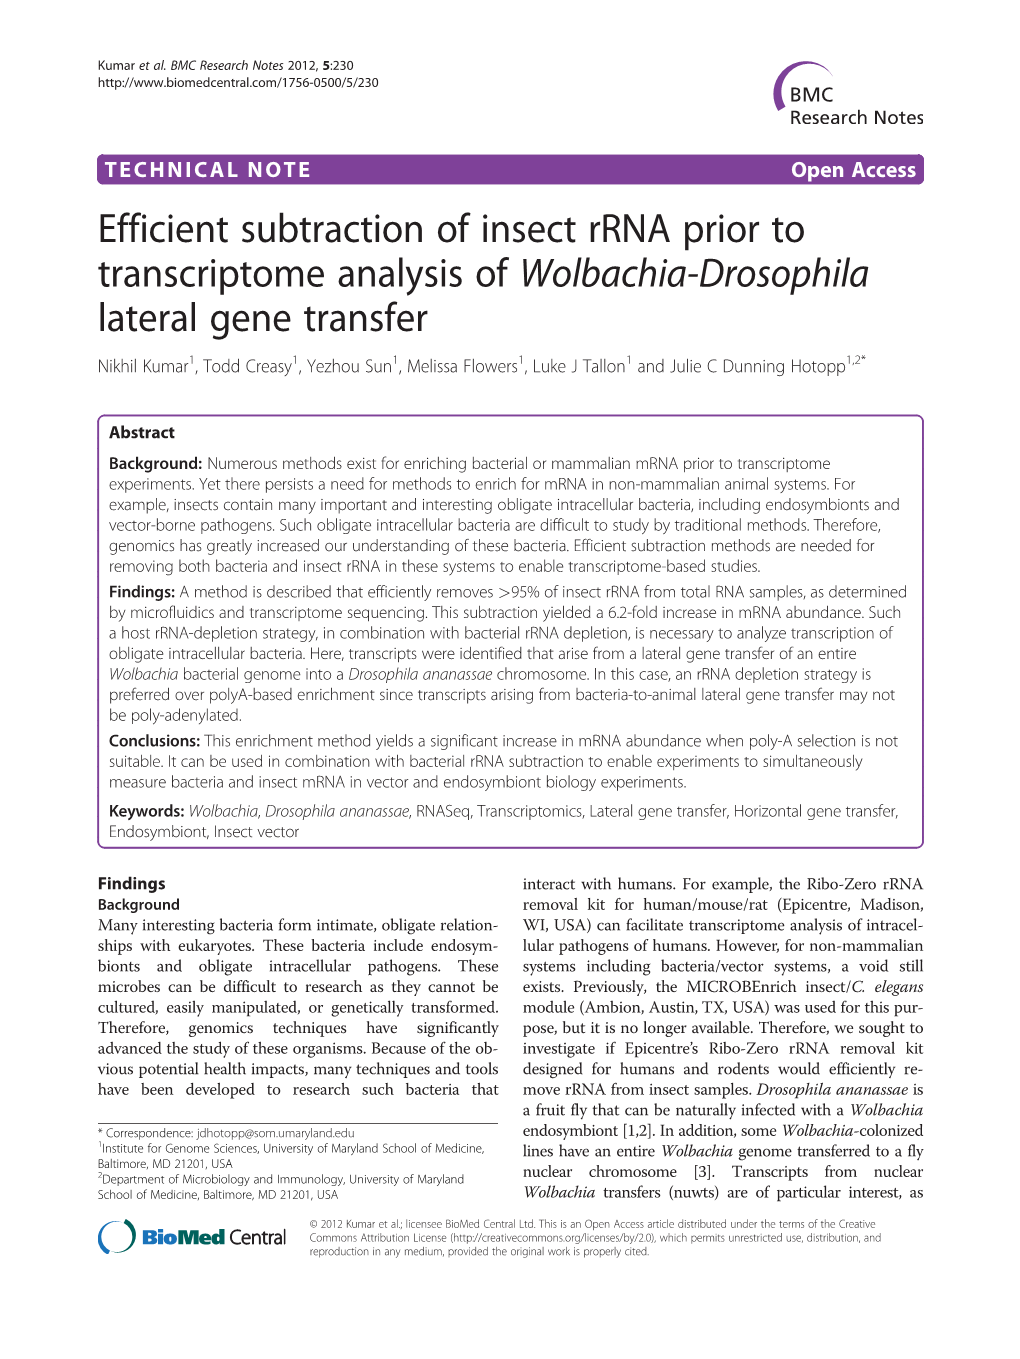 Efficient Subtraction of Insect Rrna Prior to Transcriptome Analysis Of